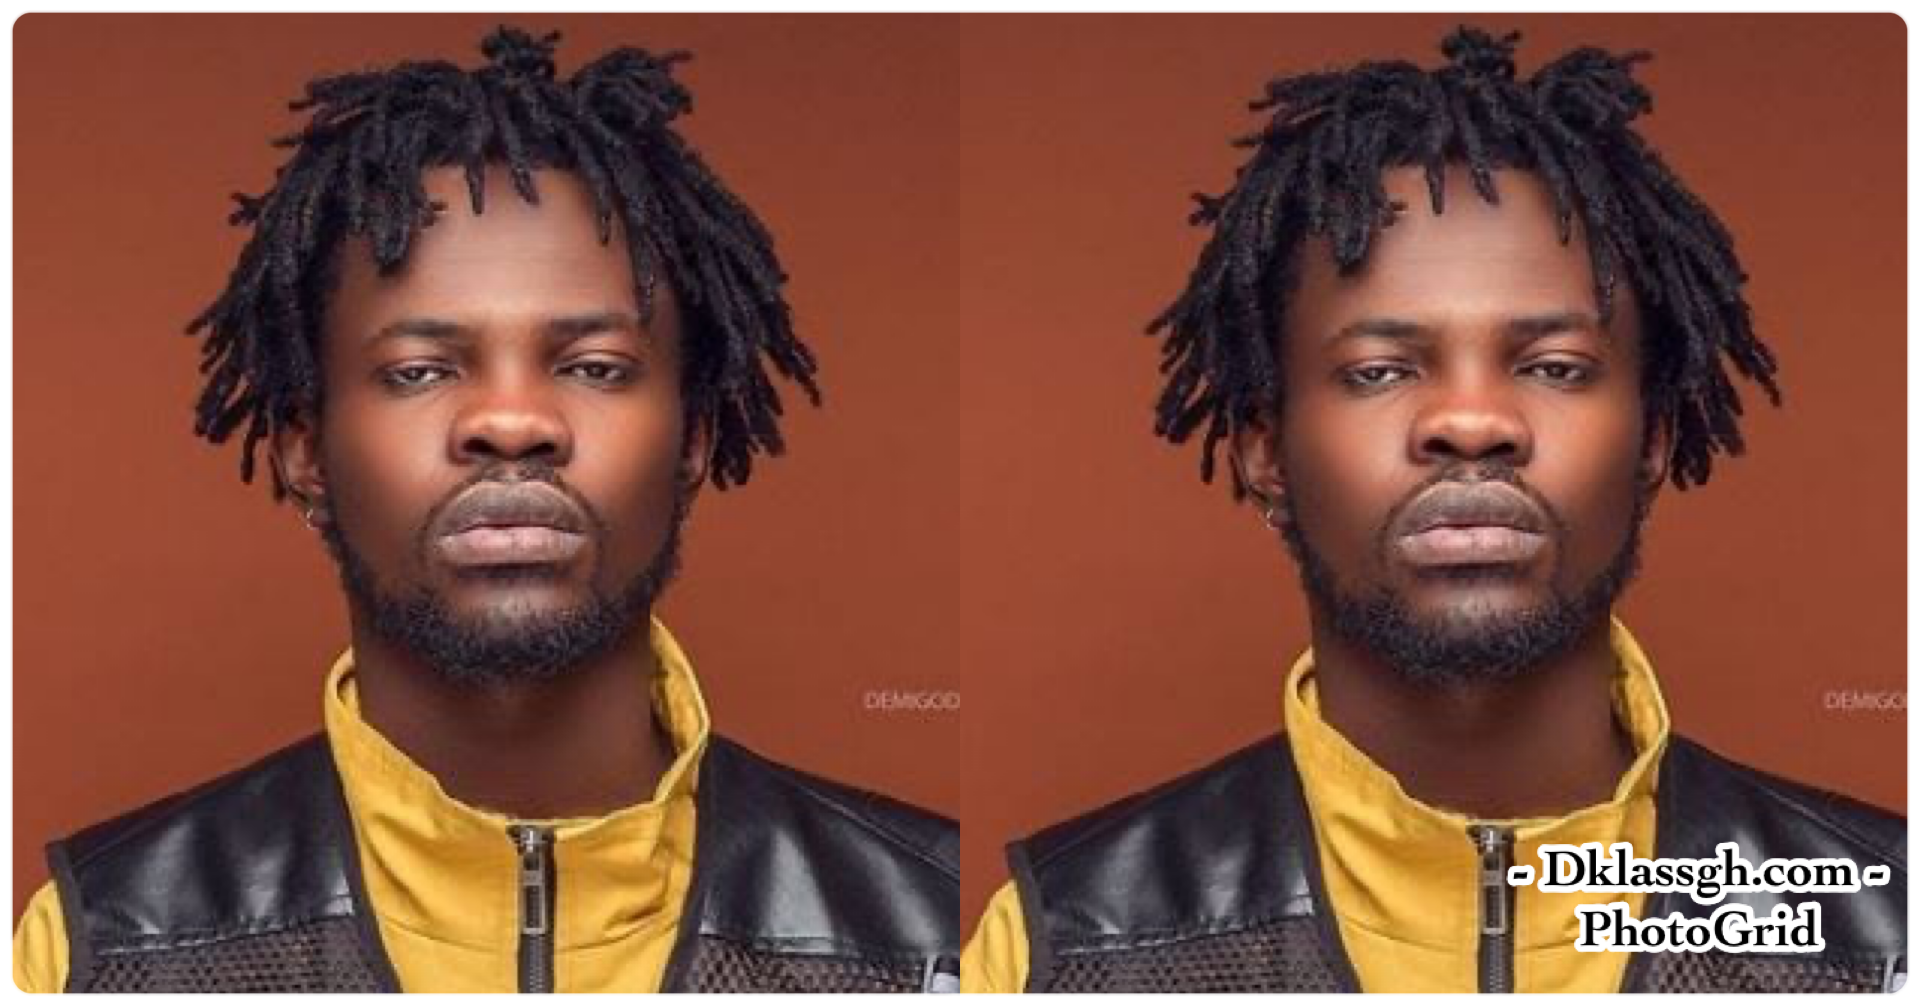 The economy has forced me to start eating gob3 – Fameye Reveals